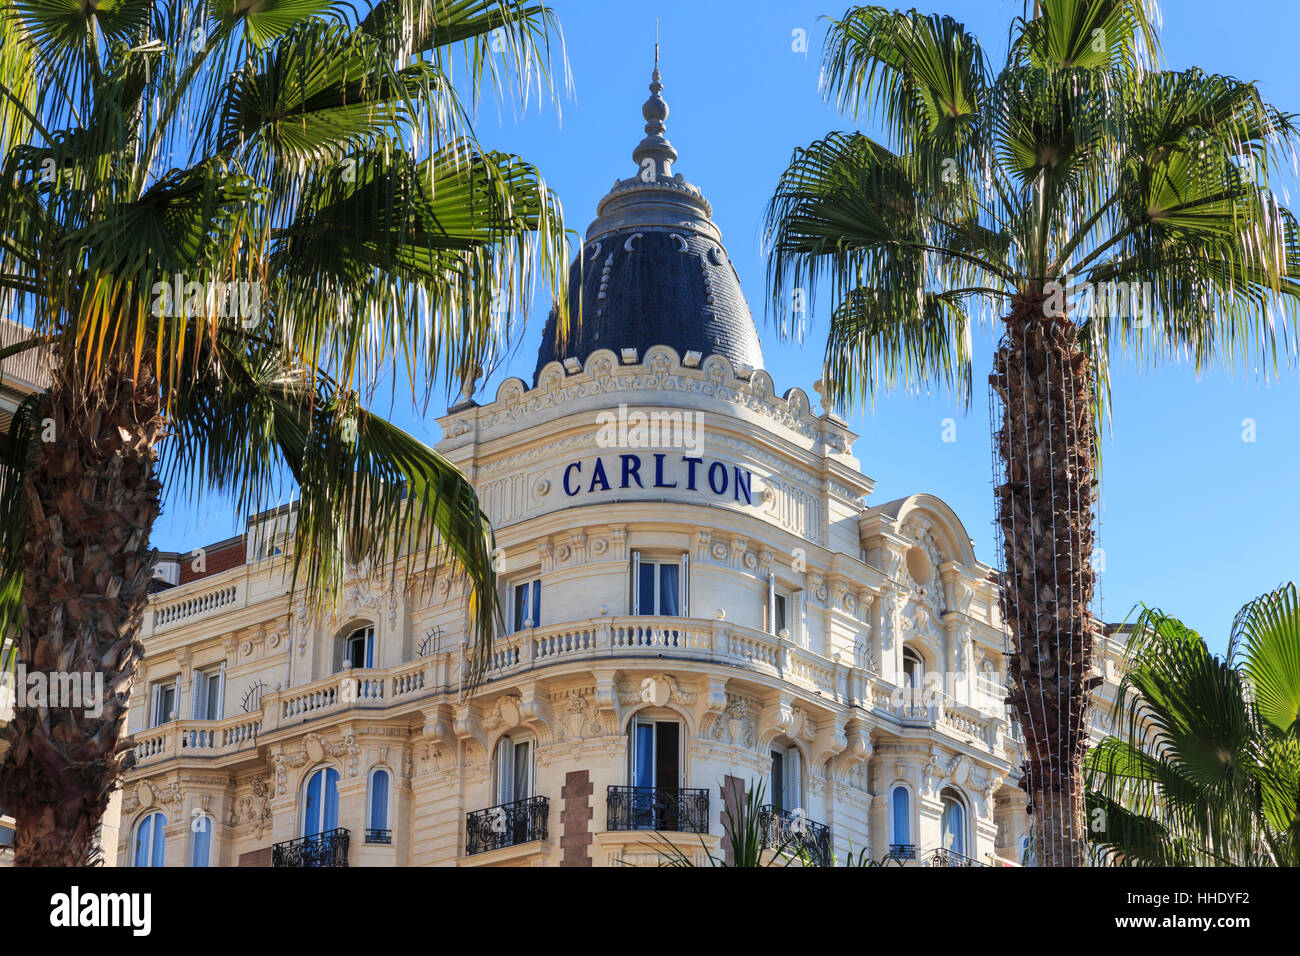 Carlton Hotel and palm trees, La Croisette, Cannes, French Riviera, Cote d'Azur, Alpes Maritimes, Provence, France Stock Photo